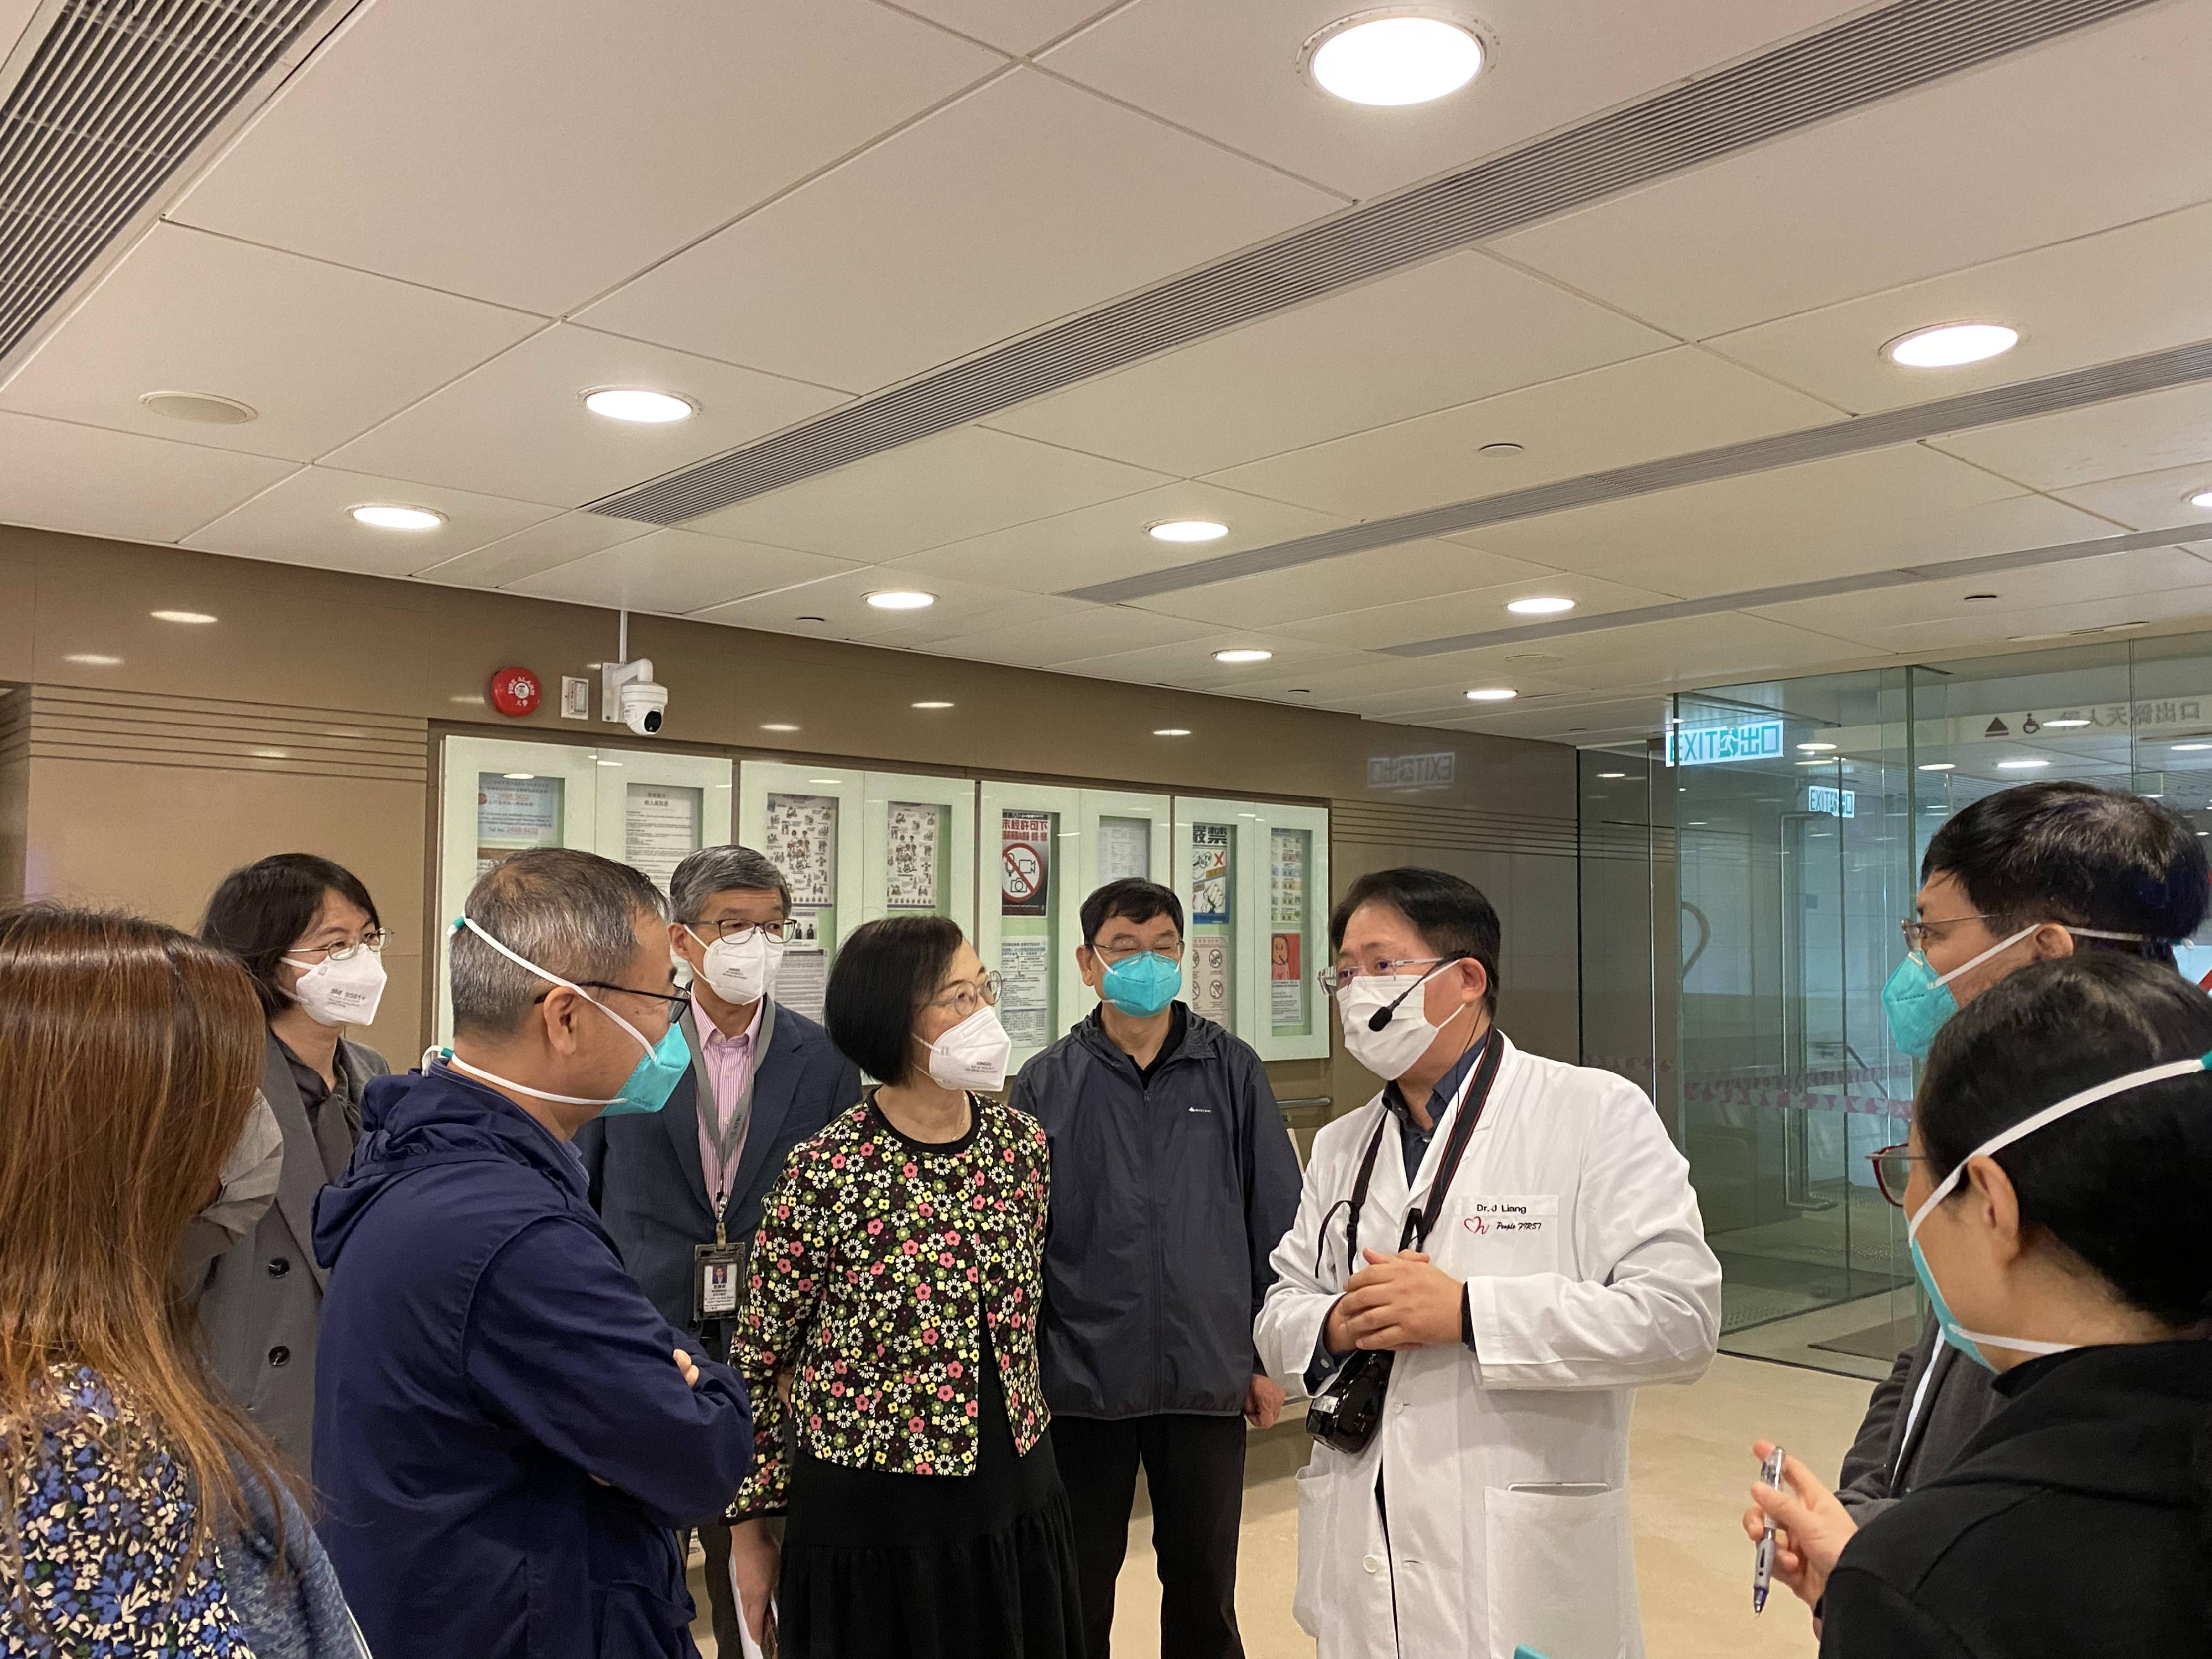 The Mainland experts visited Tin Shui Wai (Tin Yip Road) Community Health Centre today (April 19) to understand the roles of designated clinics and to exchange experiences with clinicians on COVID-19 patient management. The Secretary for Food and Health, Professor Sophia Chan (fifth left), also joined the visit.